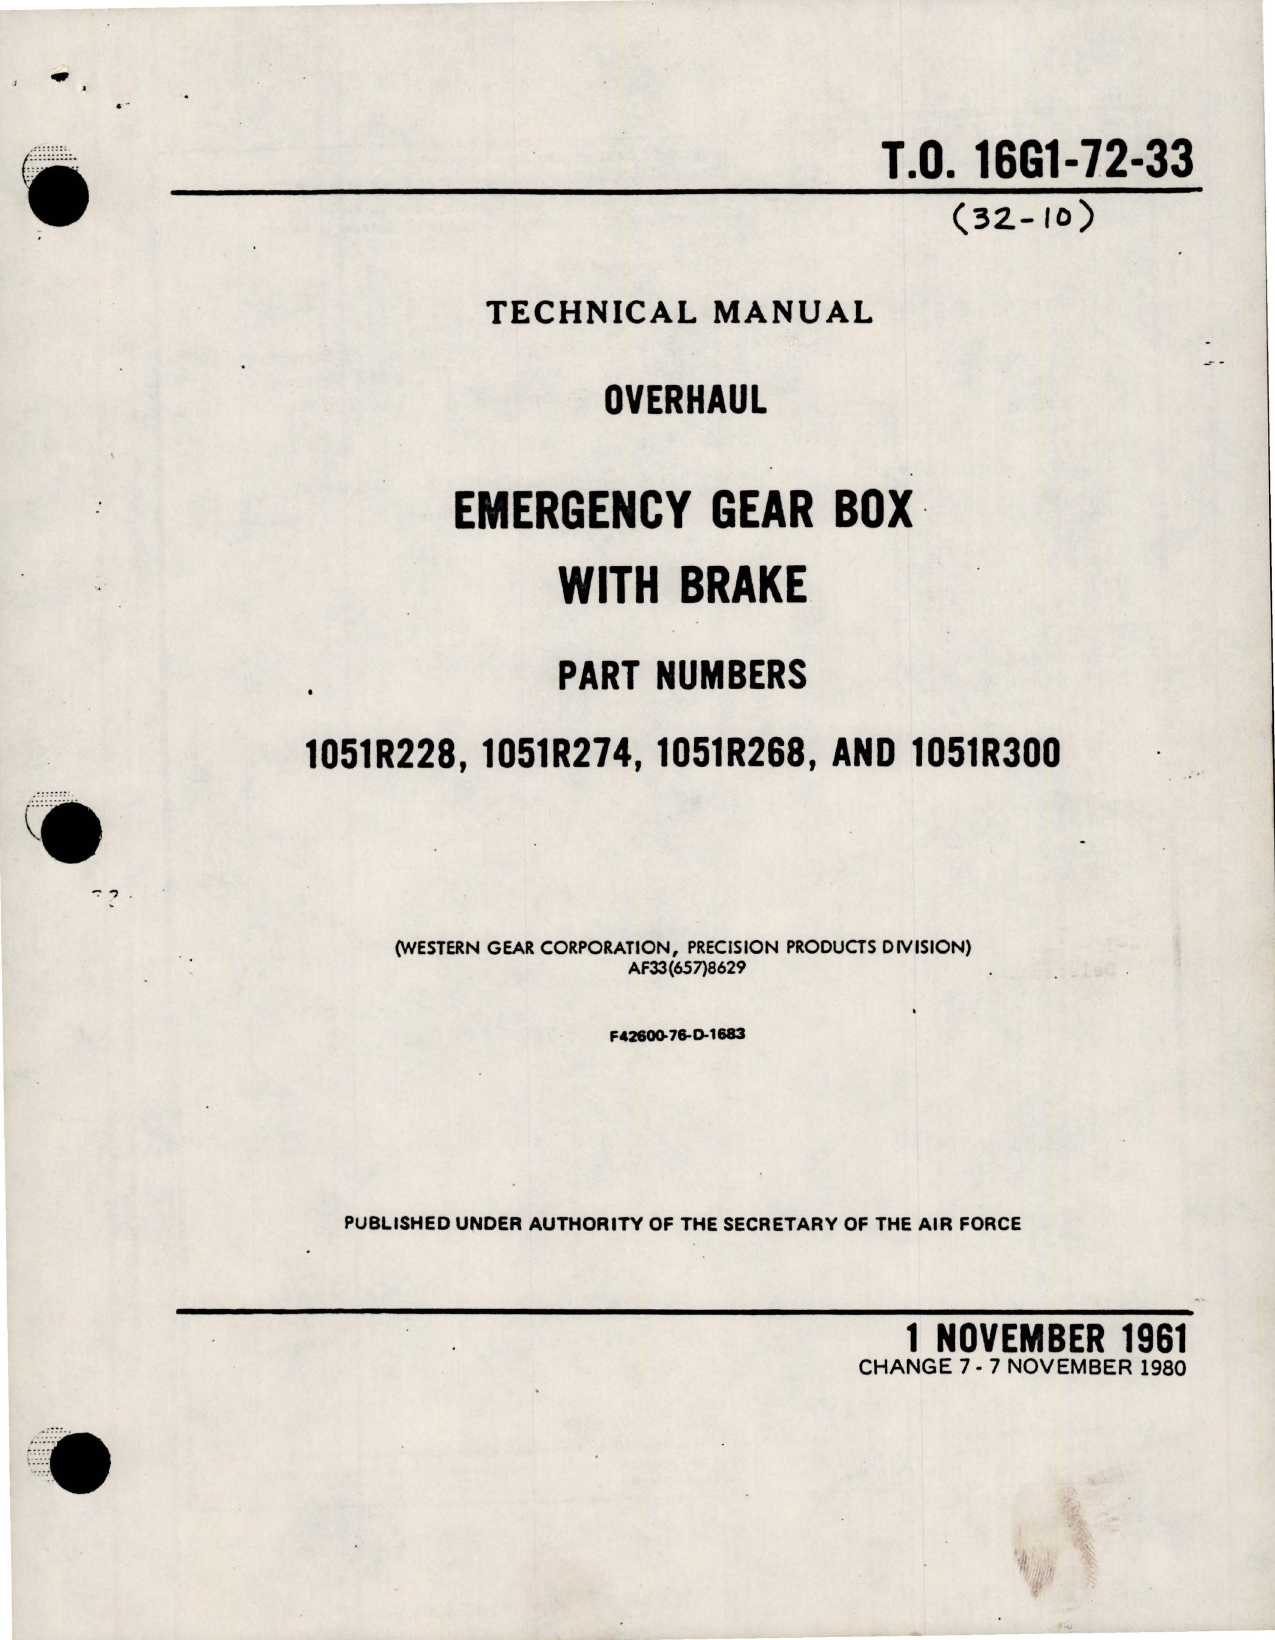 Sample page 1 from AirCorps Library document: Overhaul for Emergency Gear Box with Brake - Parts 1051R228, 1051R274, 1051R268 and 1051R300